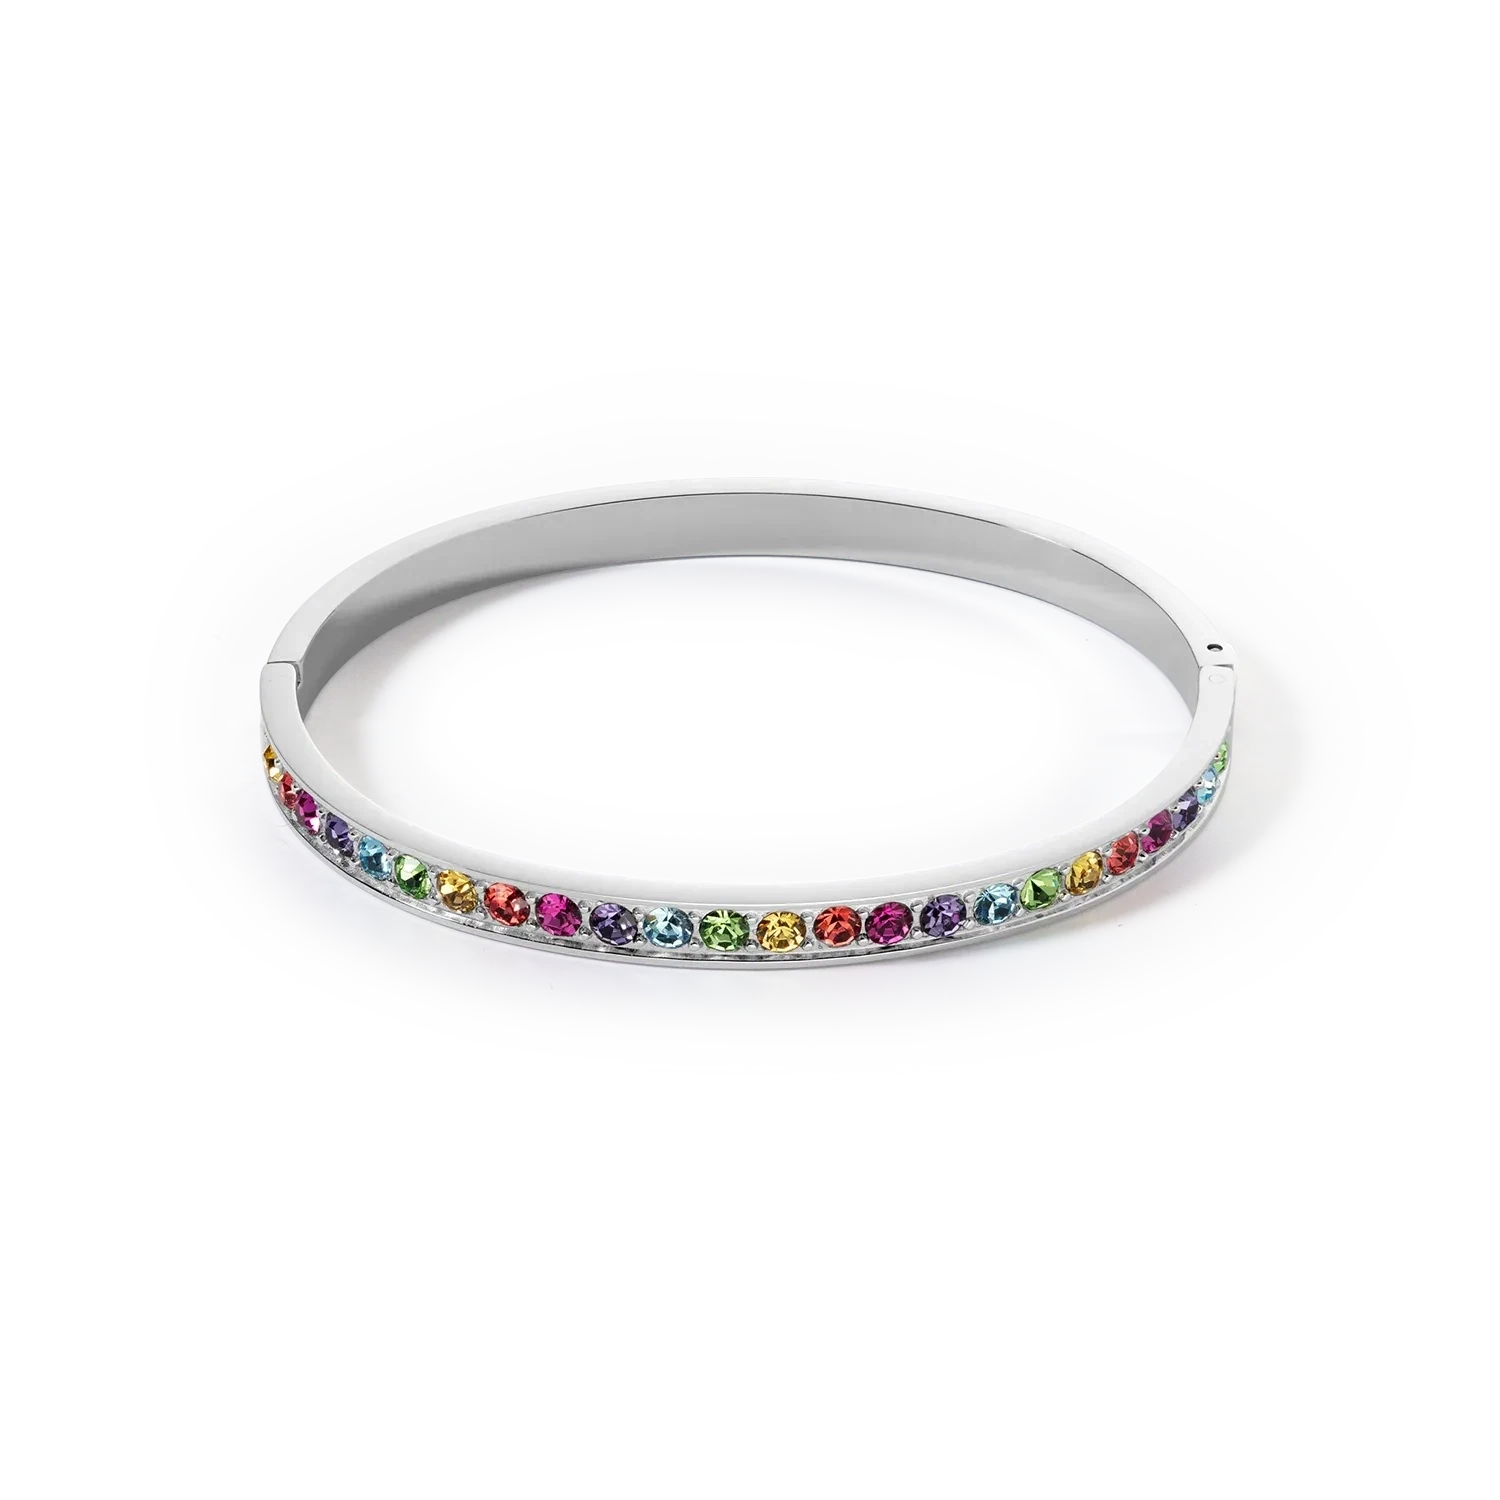 Bracelet stainless steel & crystals silver multicolor 17